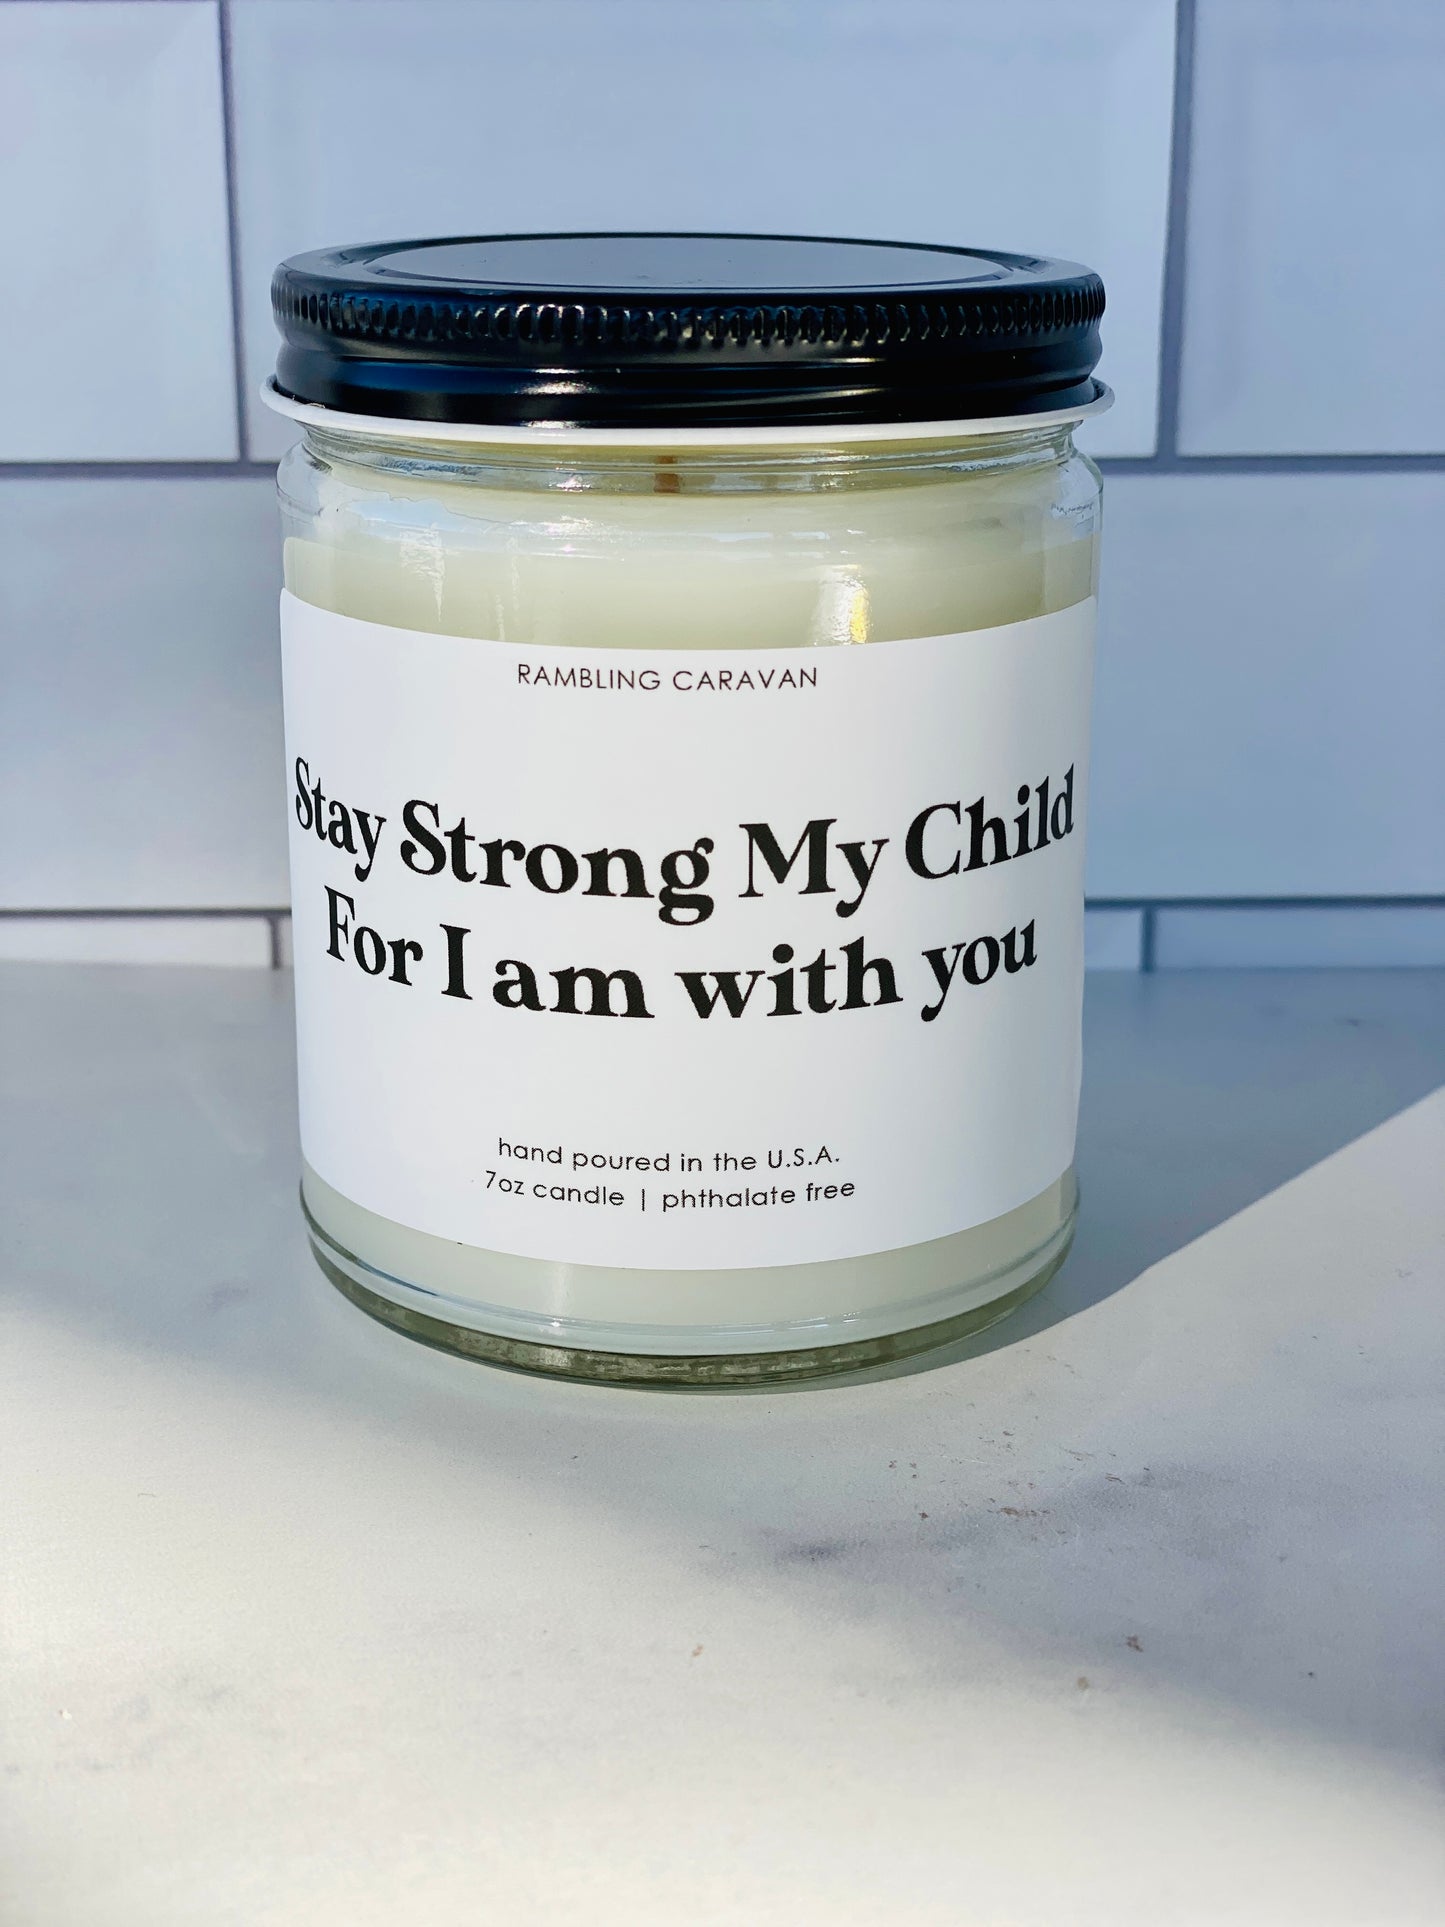 Stay Strong My Child For I am with you Candle